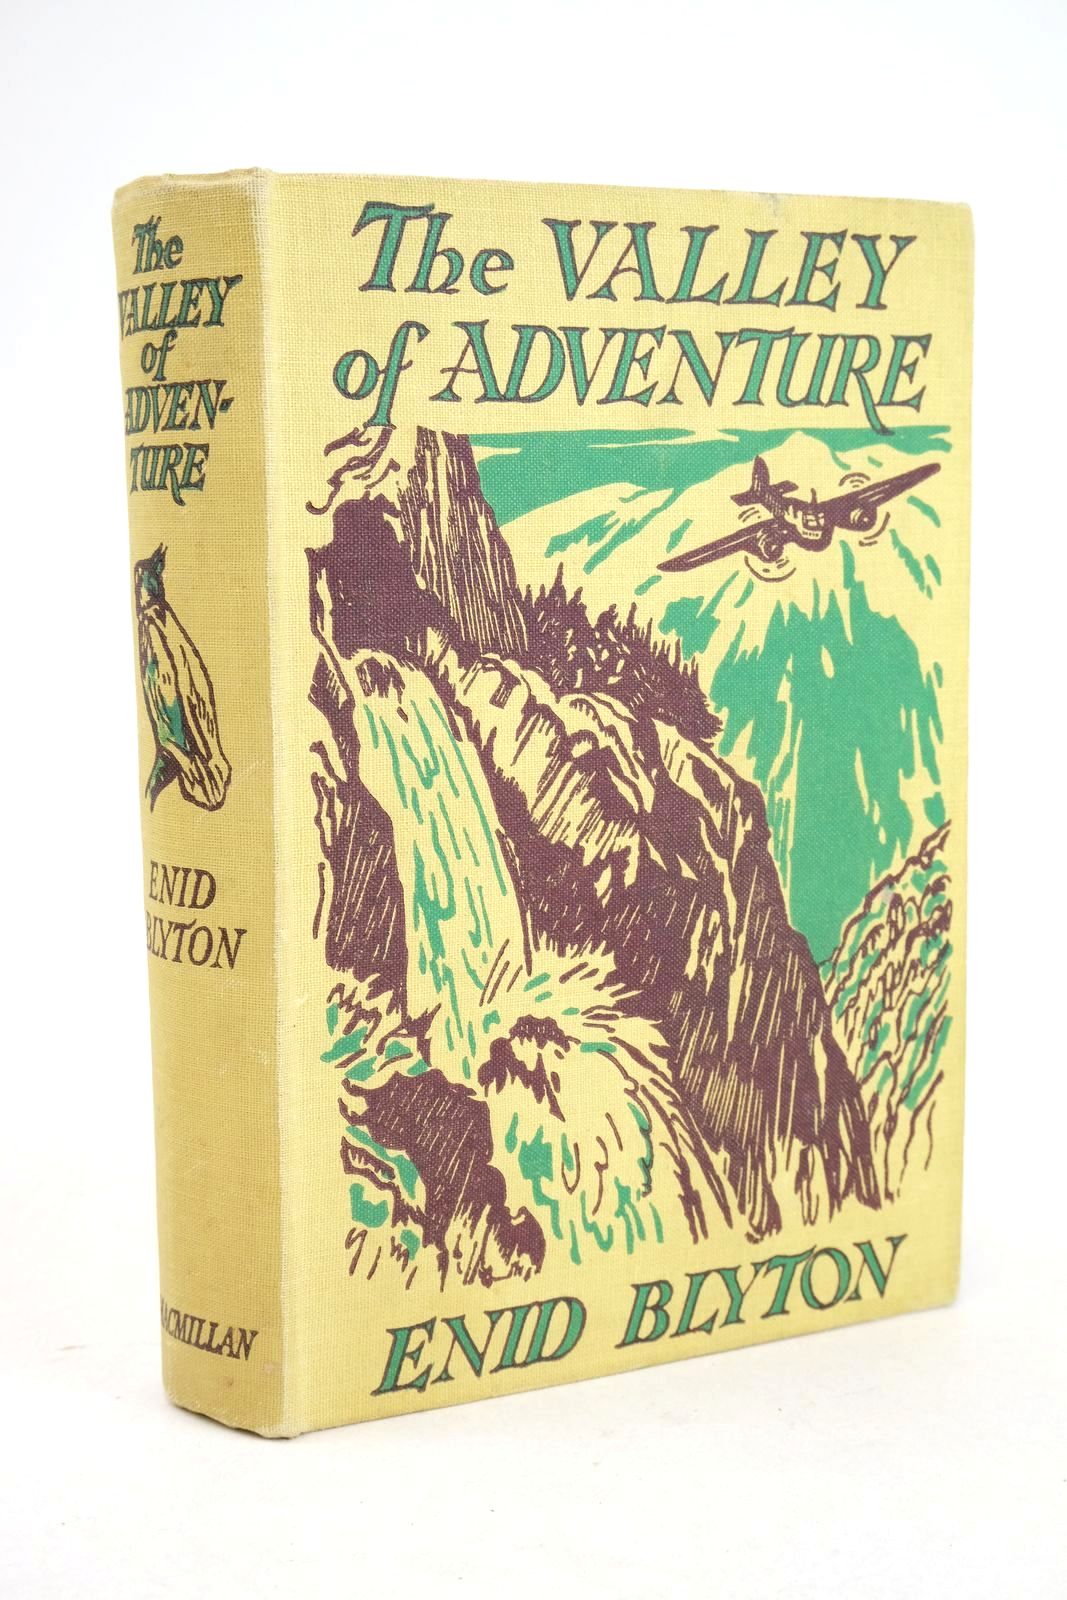 Photo of THE VALLEY OF ADVENTURE written by Blyton, Enid illustrated by Tresilian, Stuart published by Macmillan &amp; Co. Ltd. (STOCK CODE: 1325706)  for sale by Stella & Rose's Books